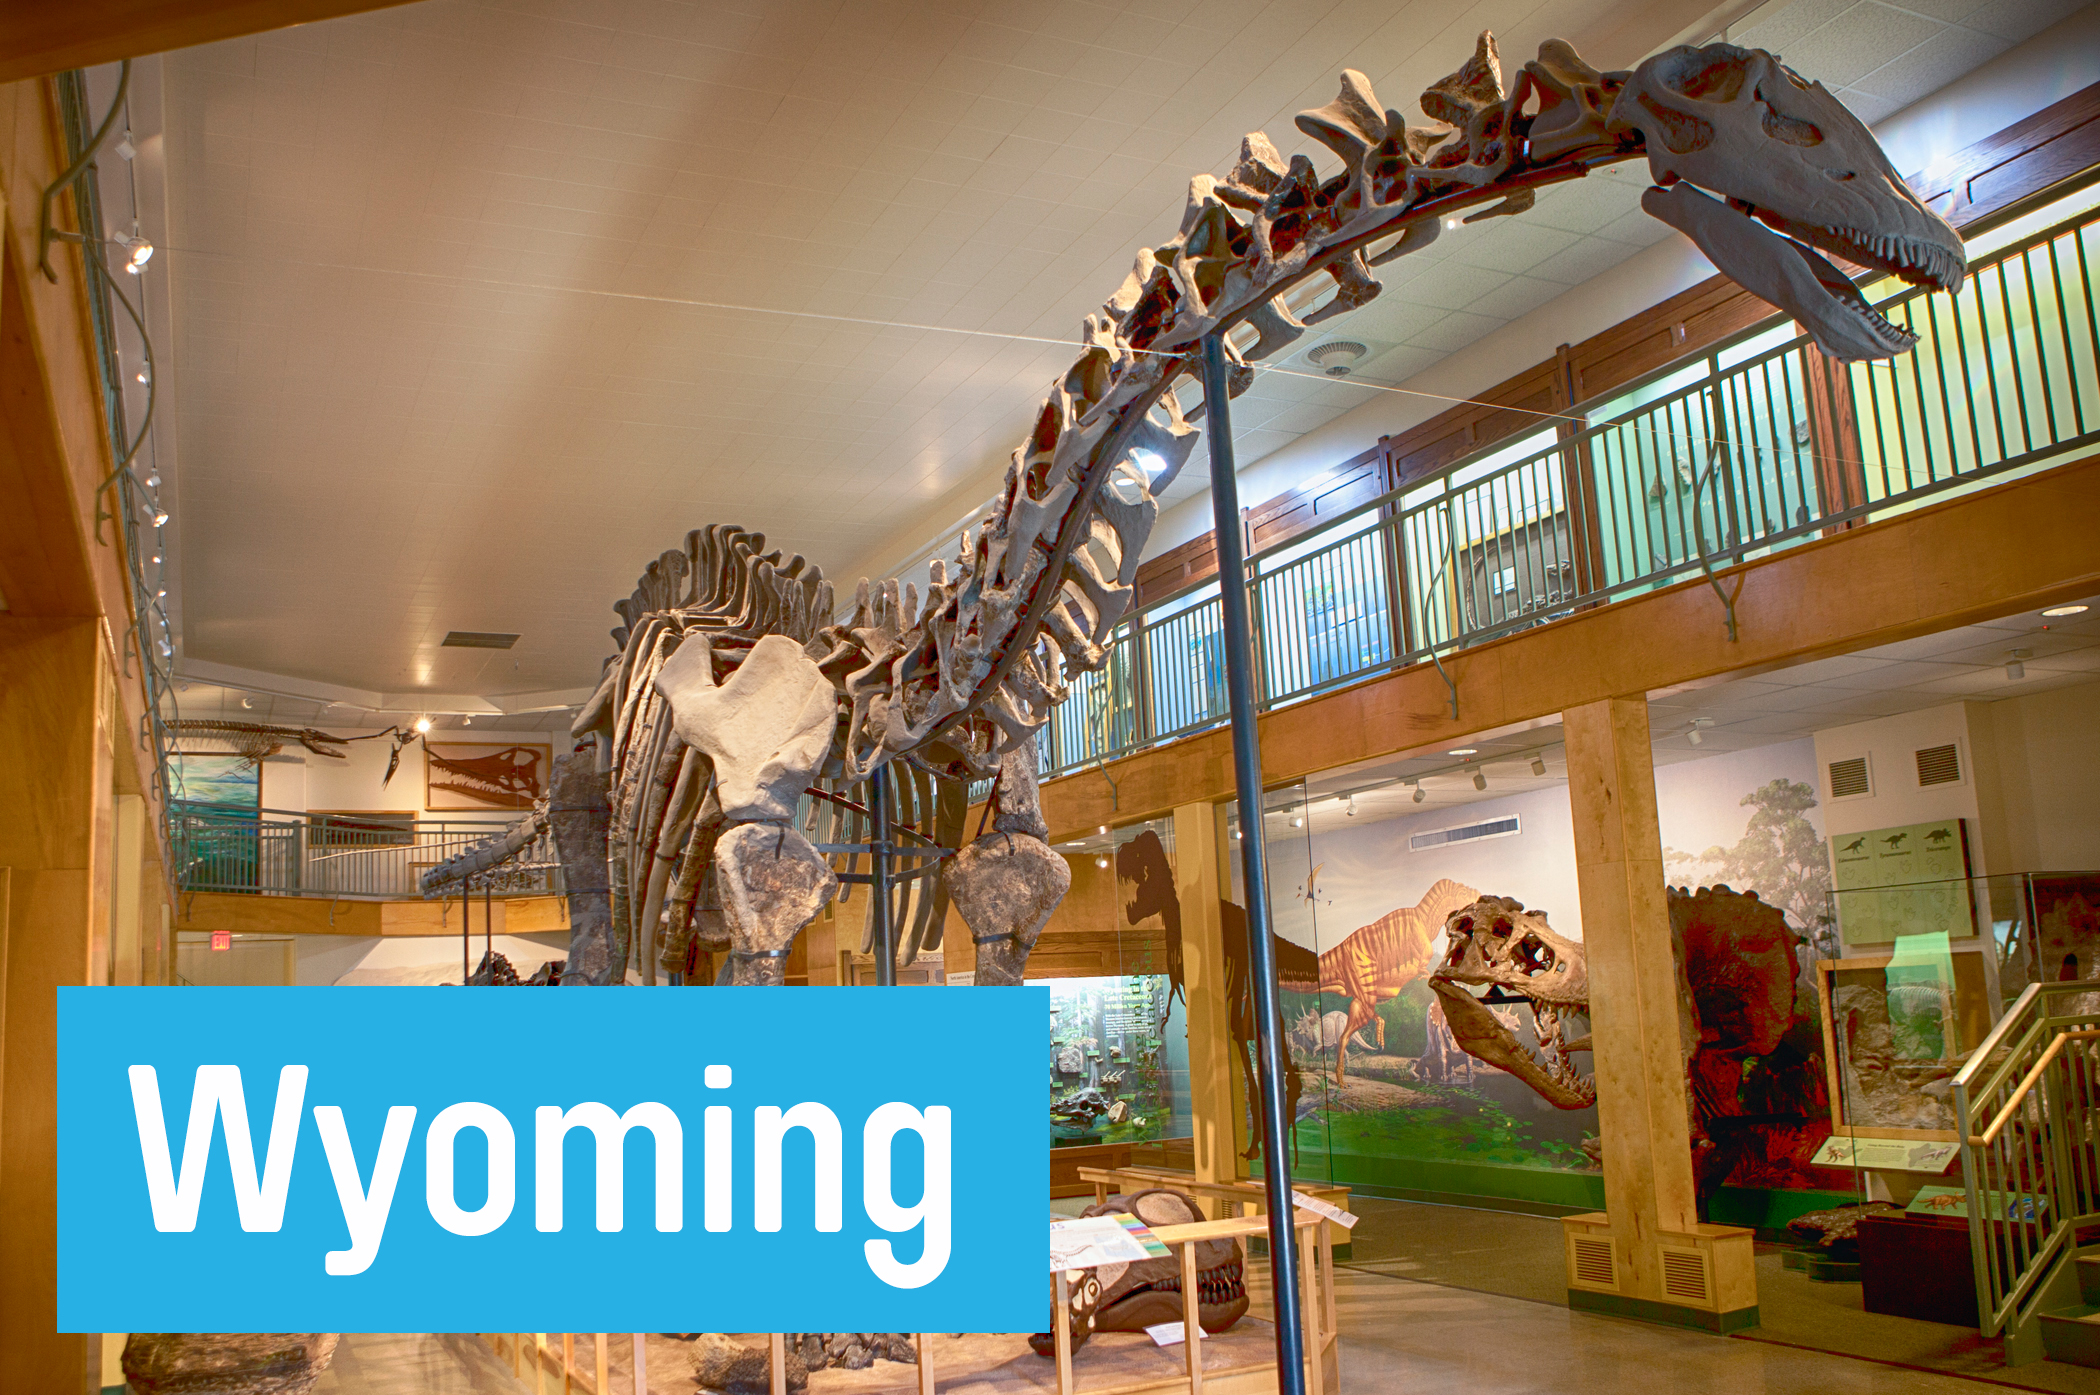 Feed your inner paleontologist at the University of Wyoming’s <a href="http://www.uwyo.edu/geomuseum/" target="_blank">Geological Museum,</a> in Laramie. Highlights include the 75-foot Apotosaurus skeleton and a chance to watch fossils being cleaned and prepped for possible display.